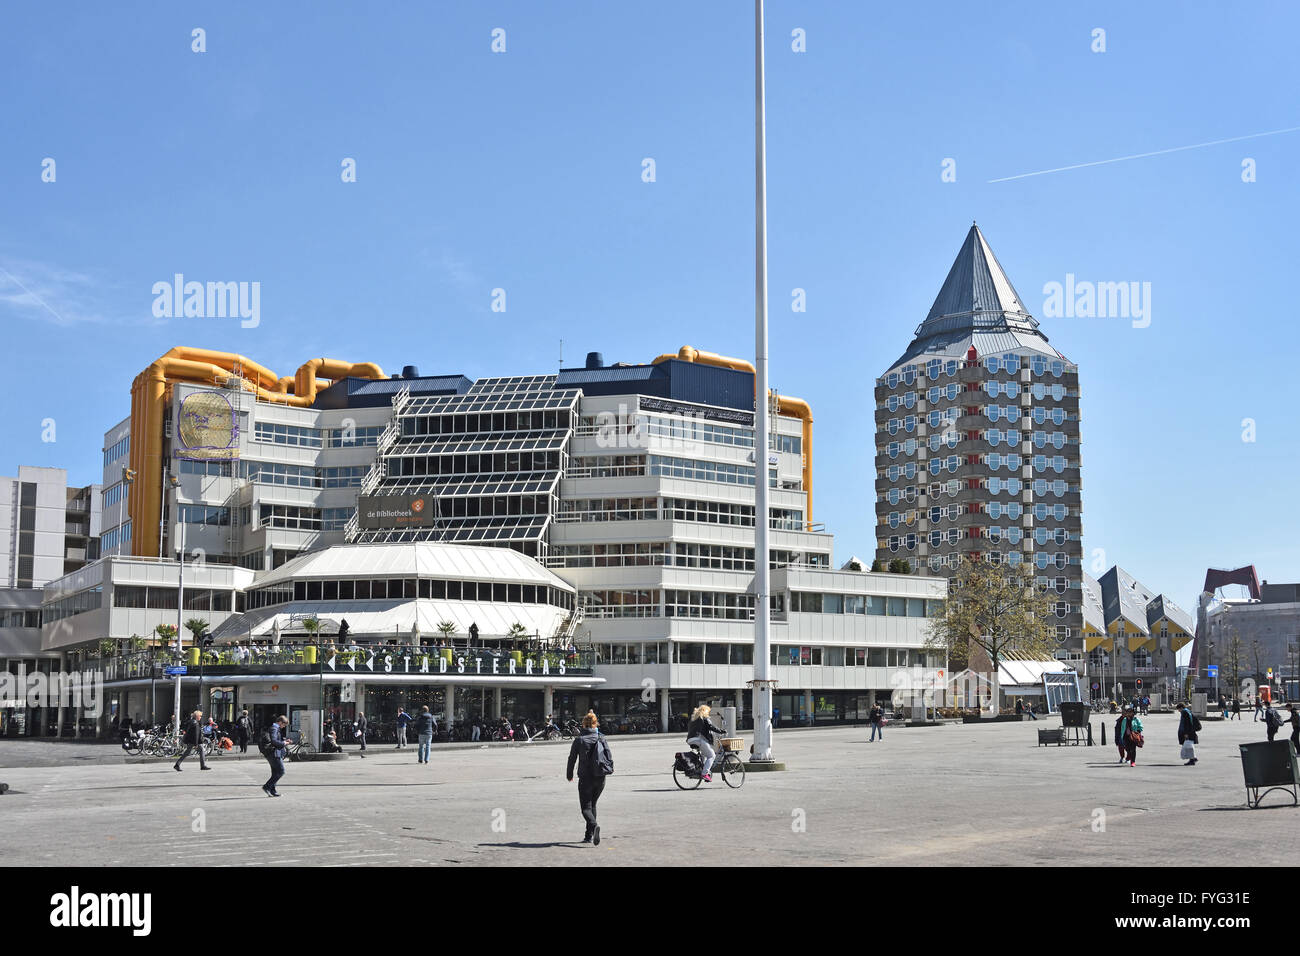 Blaak square Rotterdam The Netherlands Central Library and the Pencil Building Stock Photo